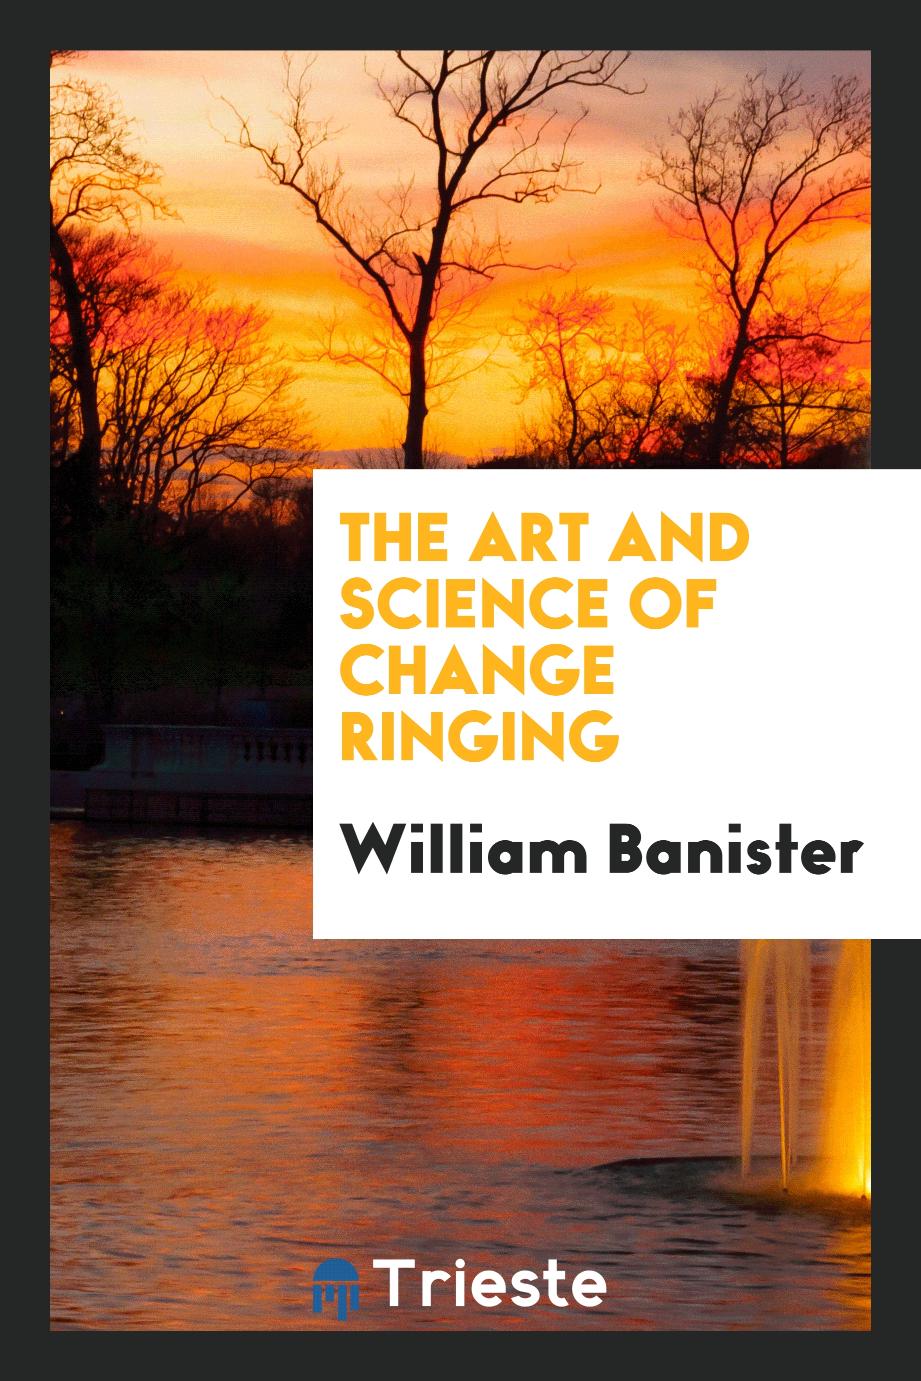 The Art and Science of Change Ringing